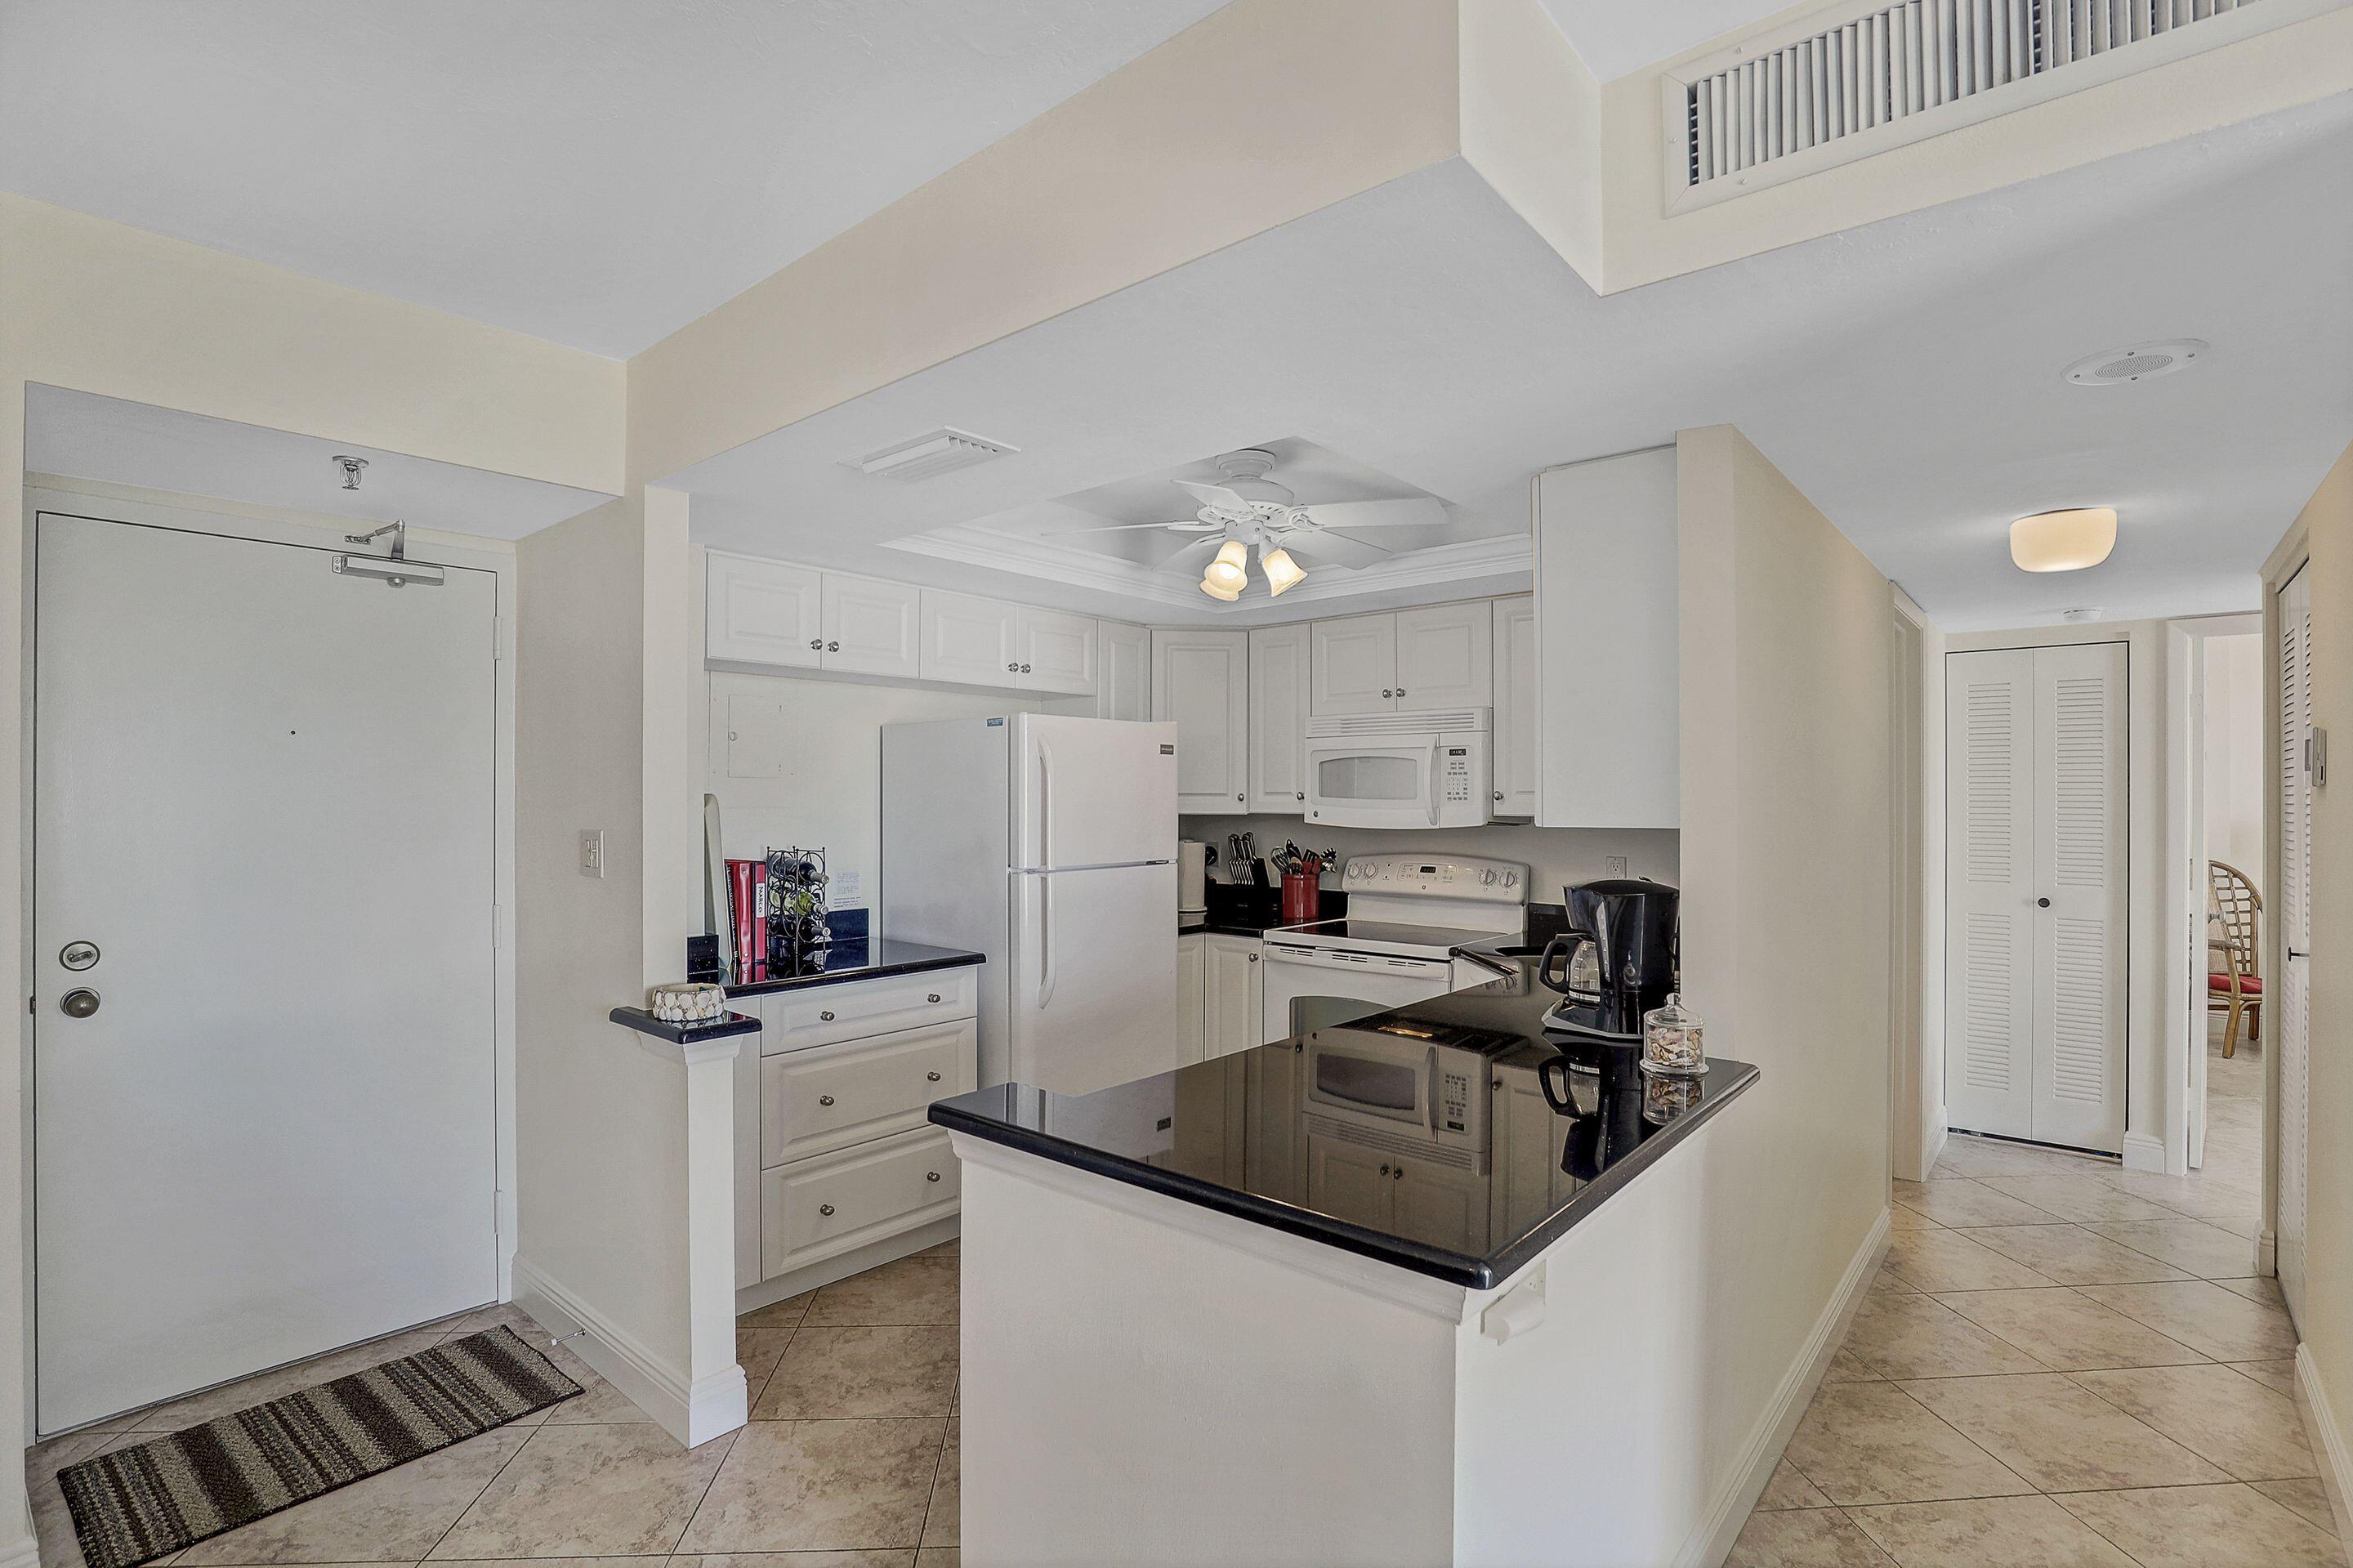 Unit 909 380 Seaview Court Marco Island Property Listing 2221666